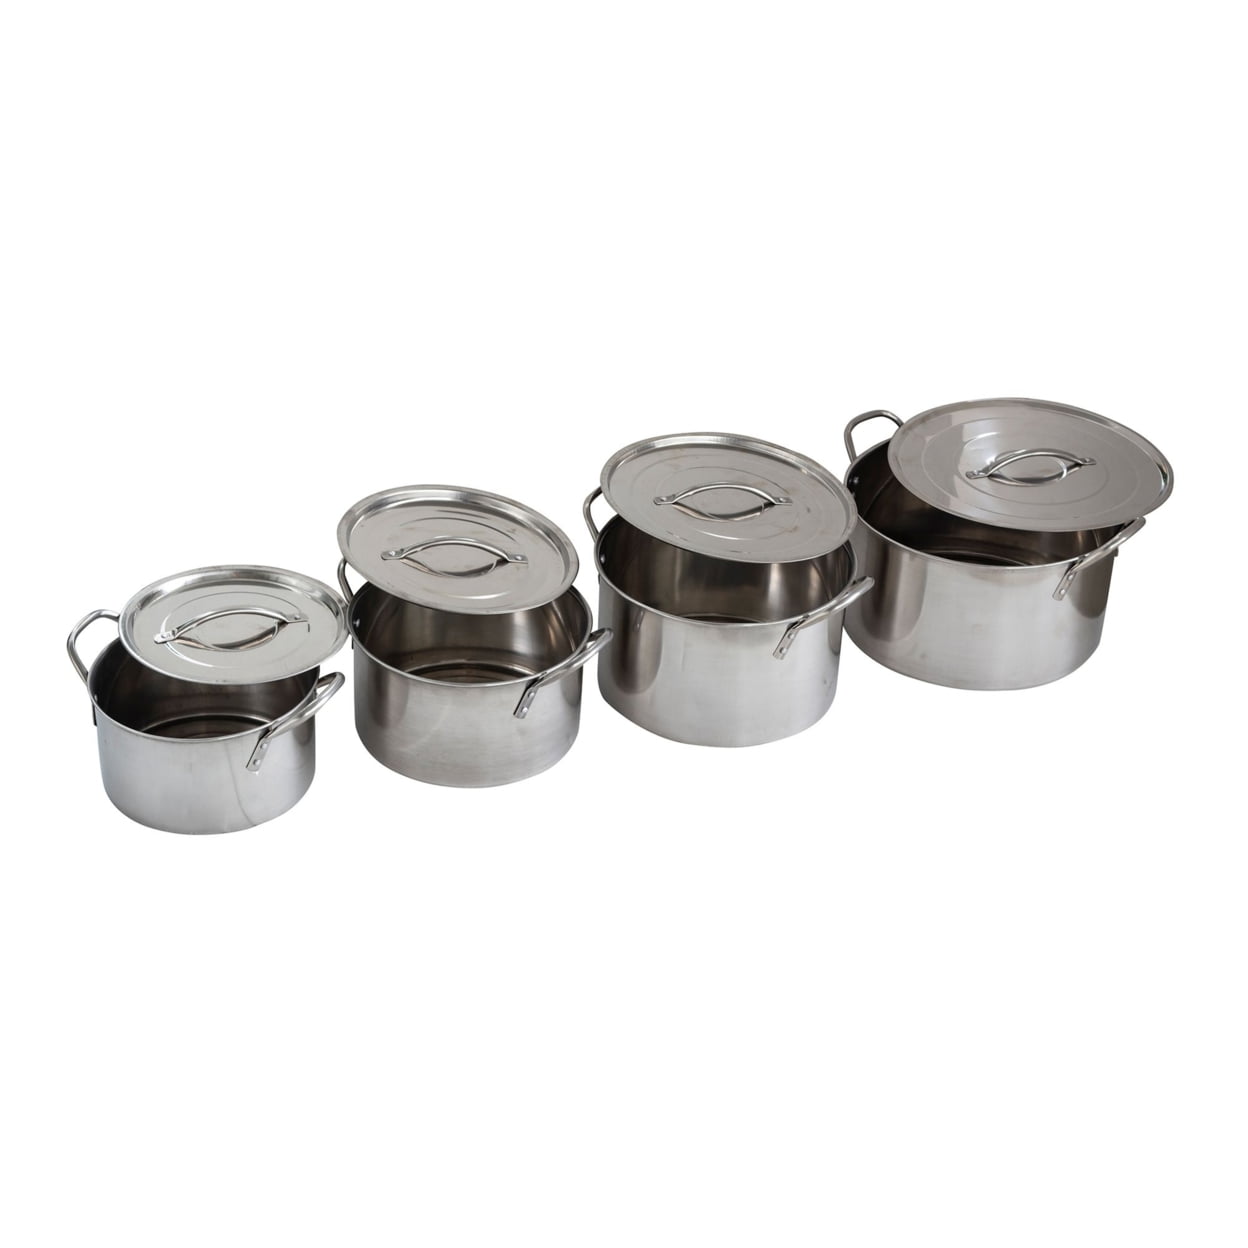 Picture of AmeriHome SSTP4 Stainless Steel Stock Pot Set, Silver - 8 Piece